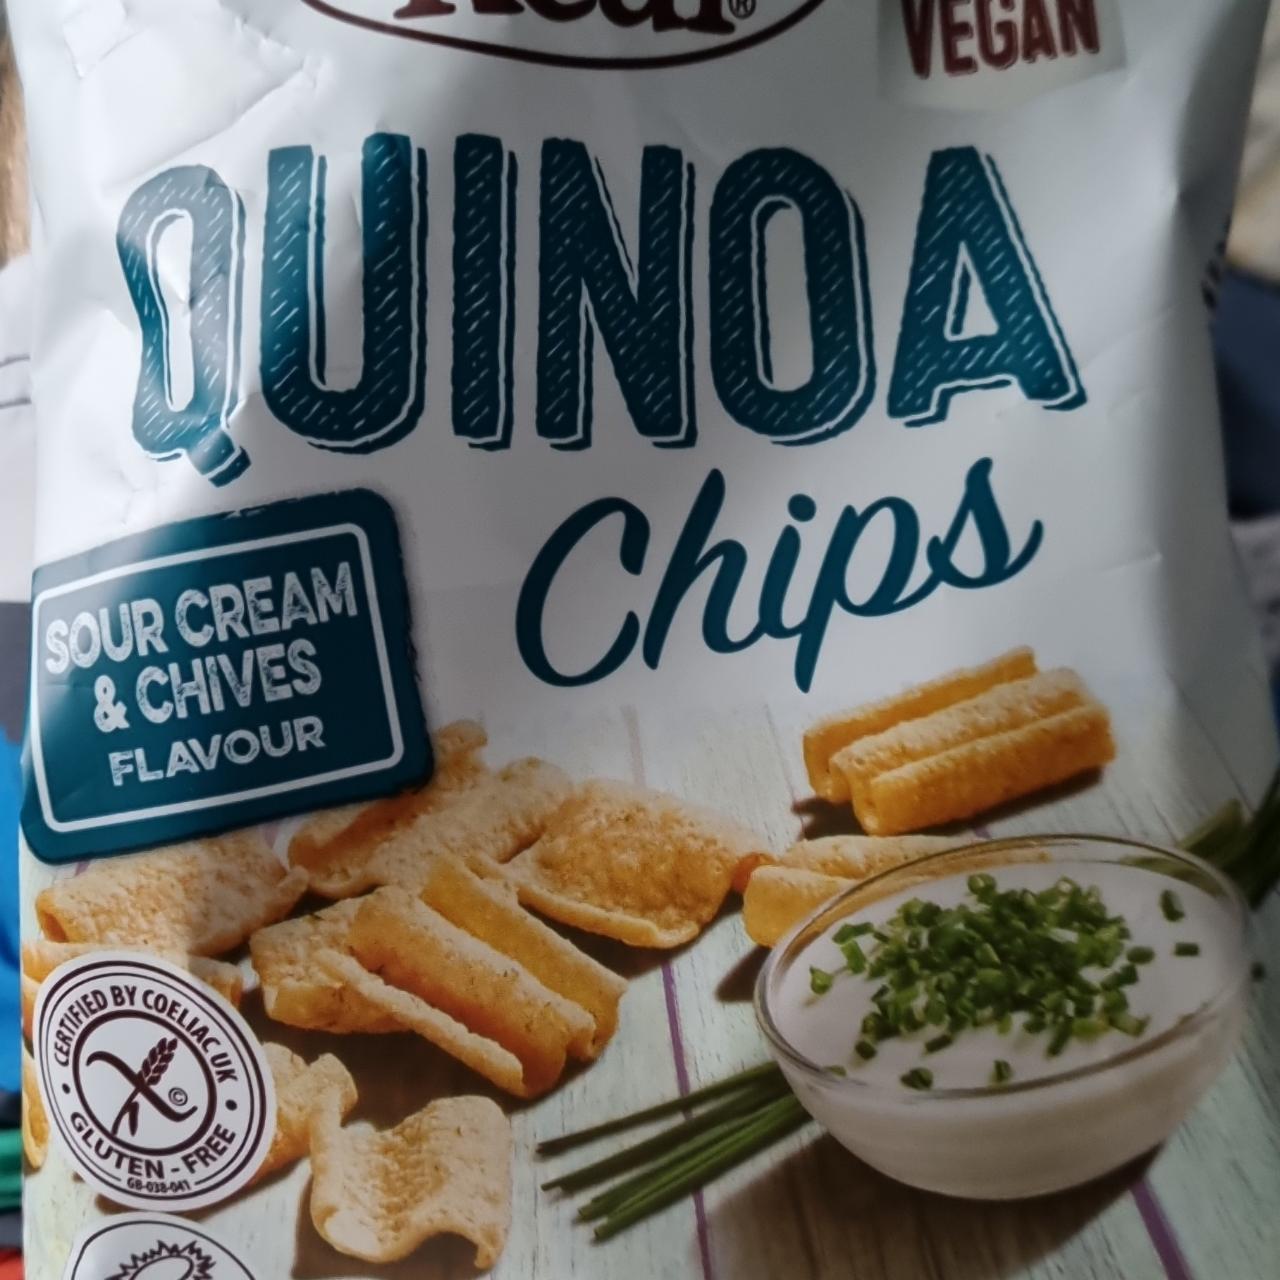 Zdjęcia - Eat real Quinoa chips sour cream & chives flavour